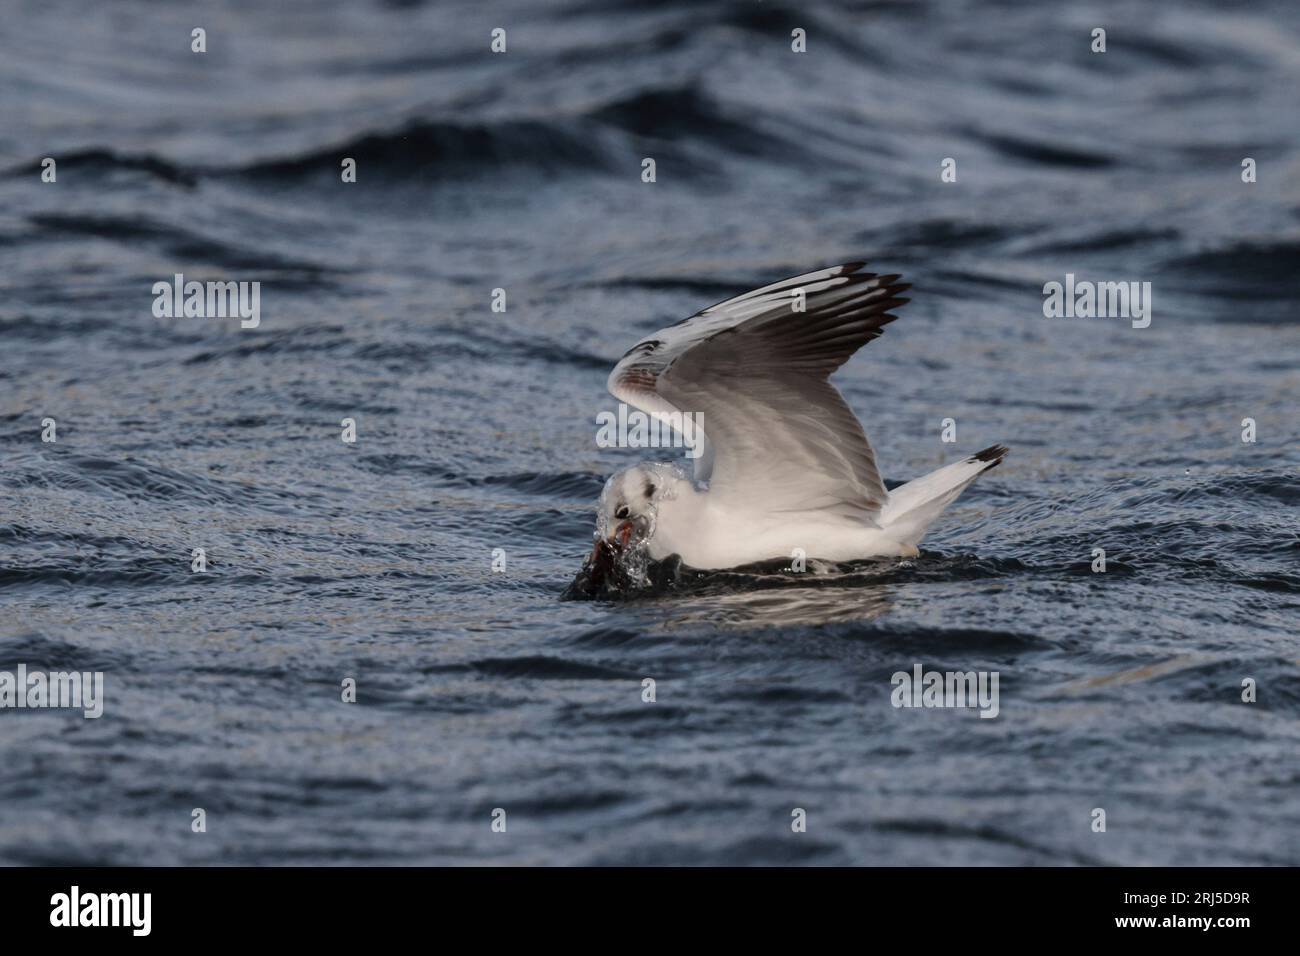 Juvenile black headed gull picking up a seagrass rhizome. Curious habit of gulls picking and carrying seagrass. Malta, Mediterranean Stock Photo